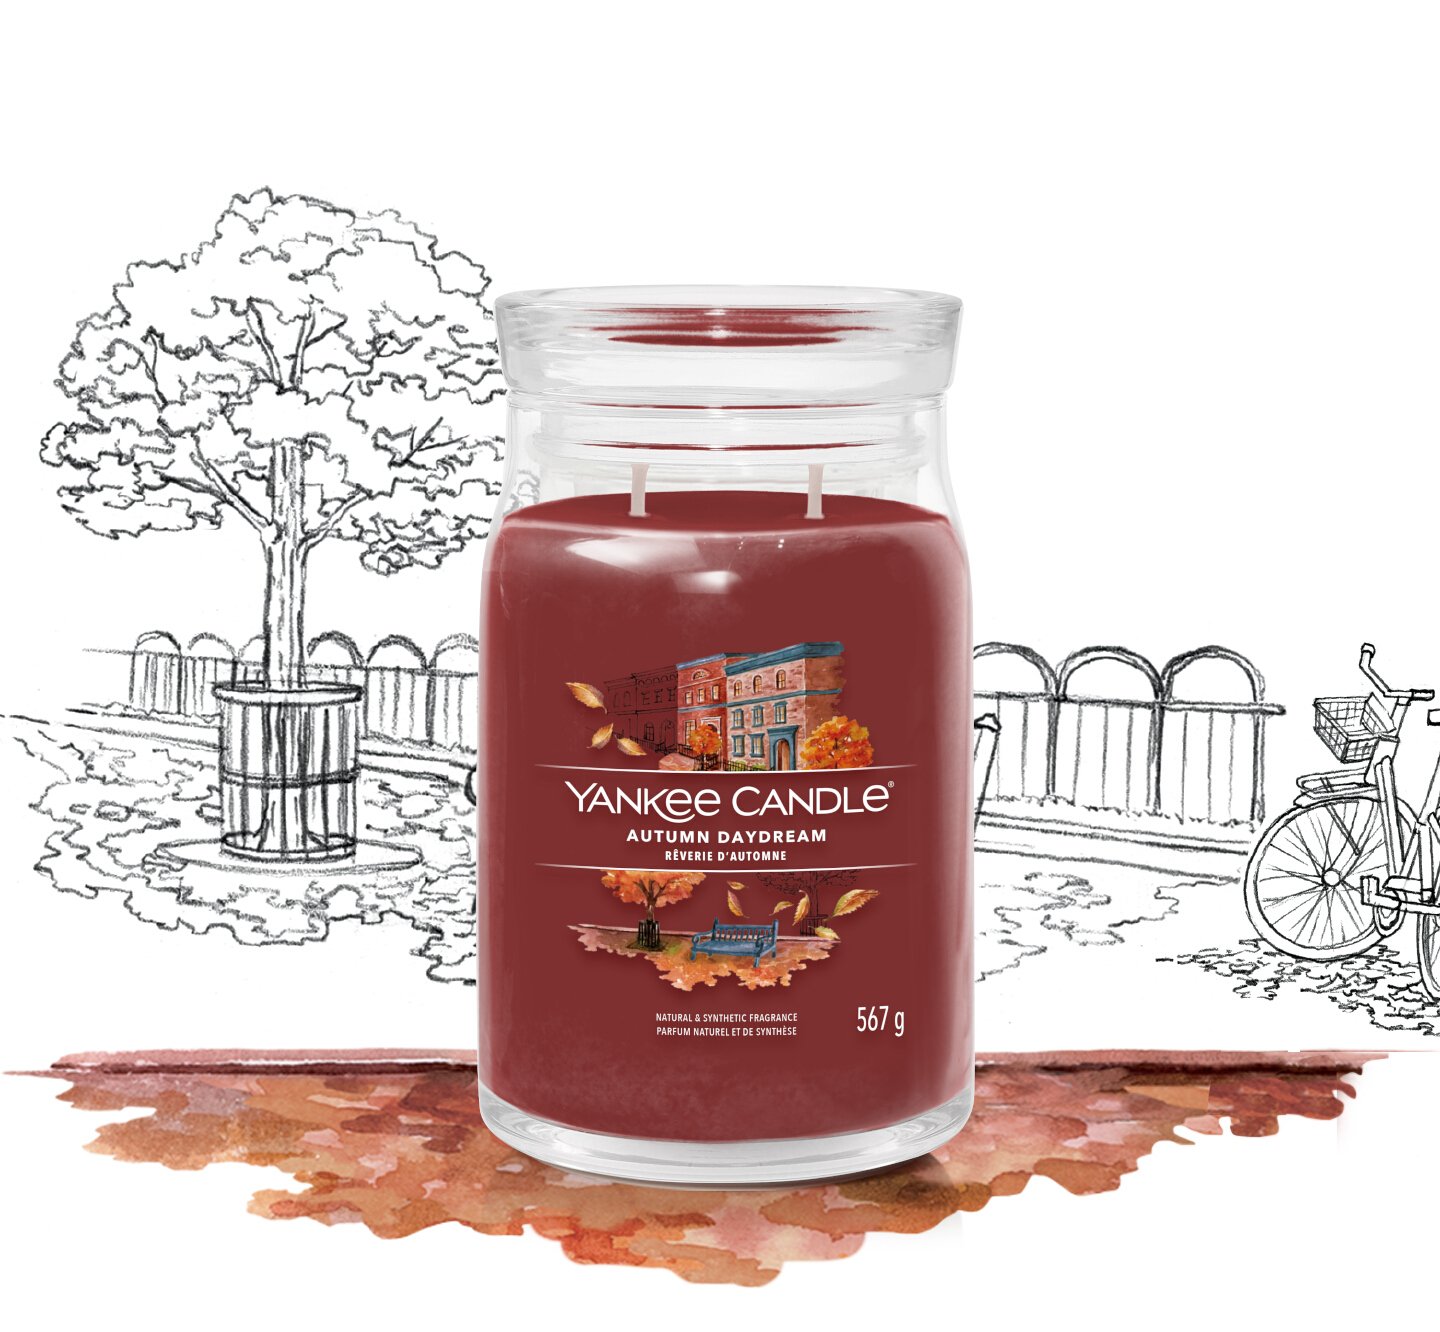 Yankee Candle Is 'Daydreaming of Autumn' With These 5 New